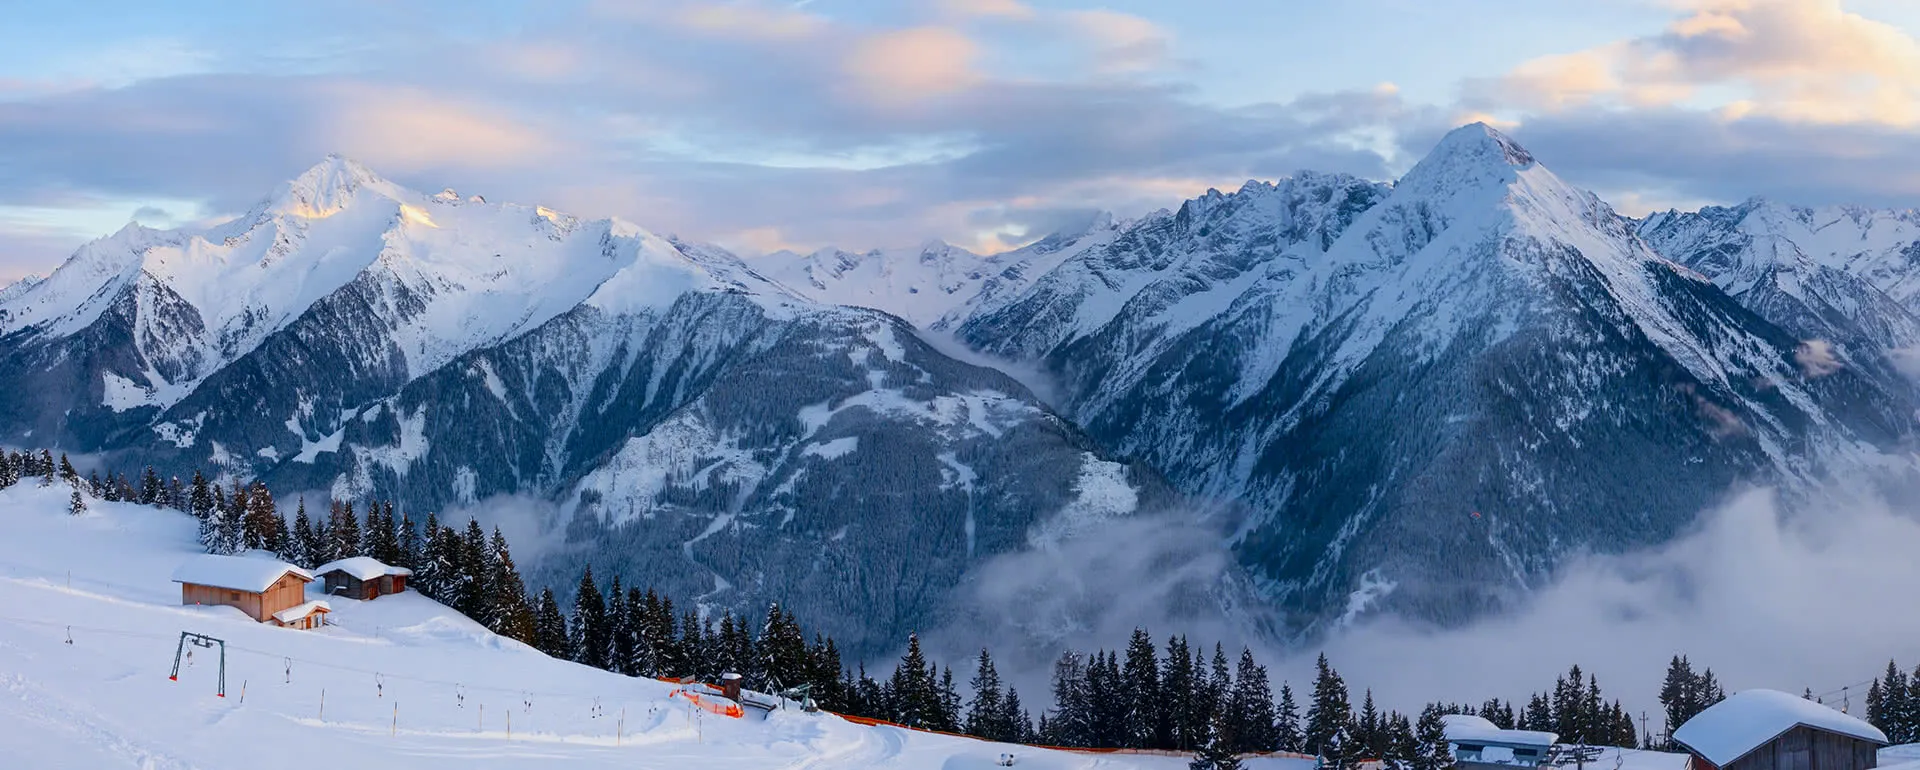 Mayrhofen - the destination with youth hostels